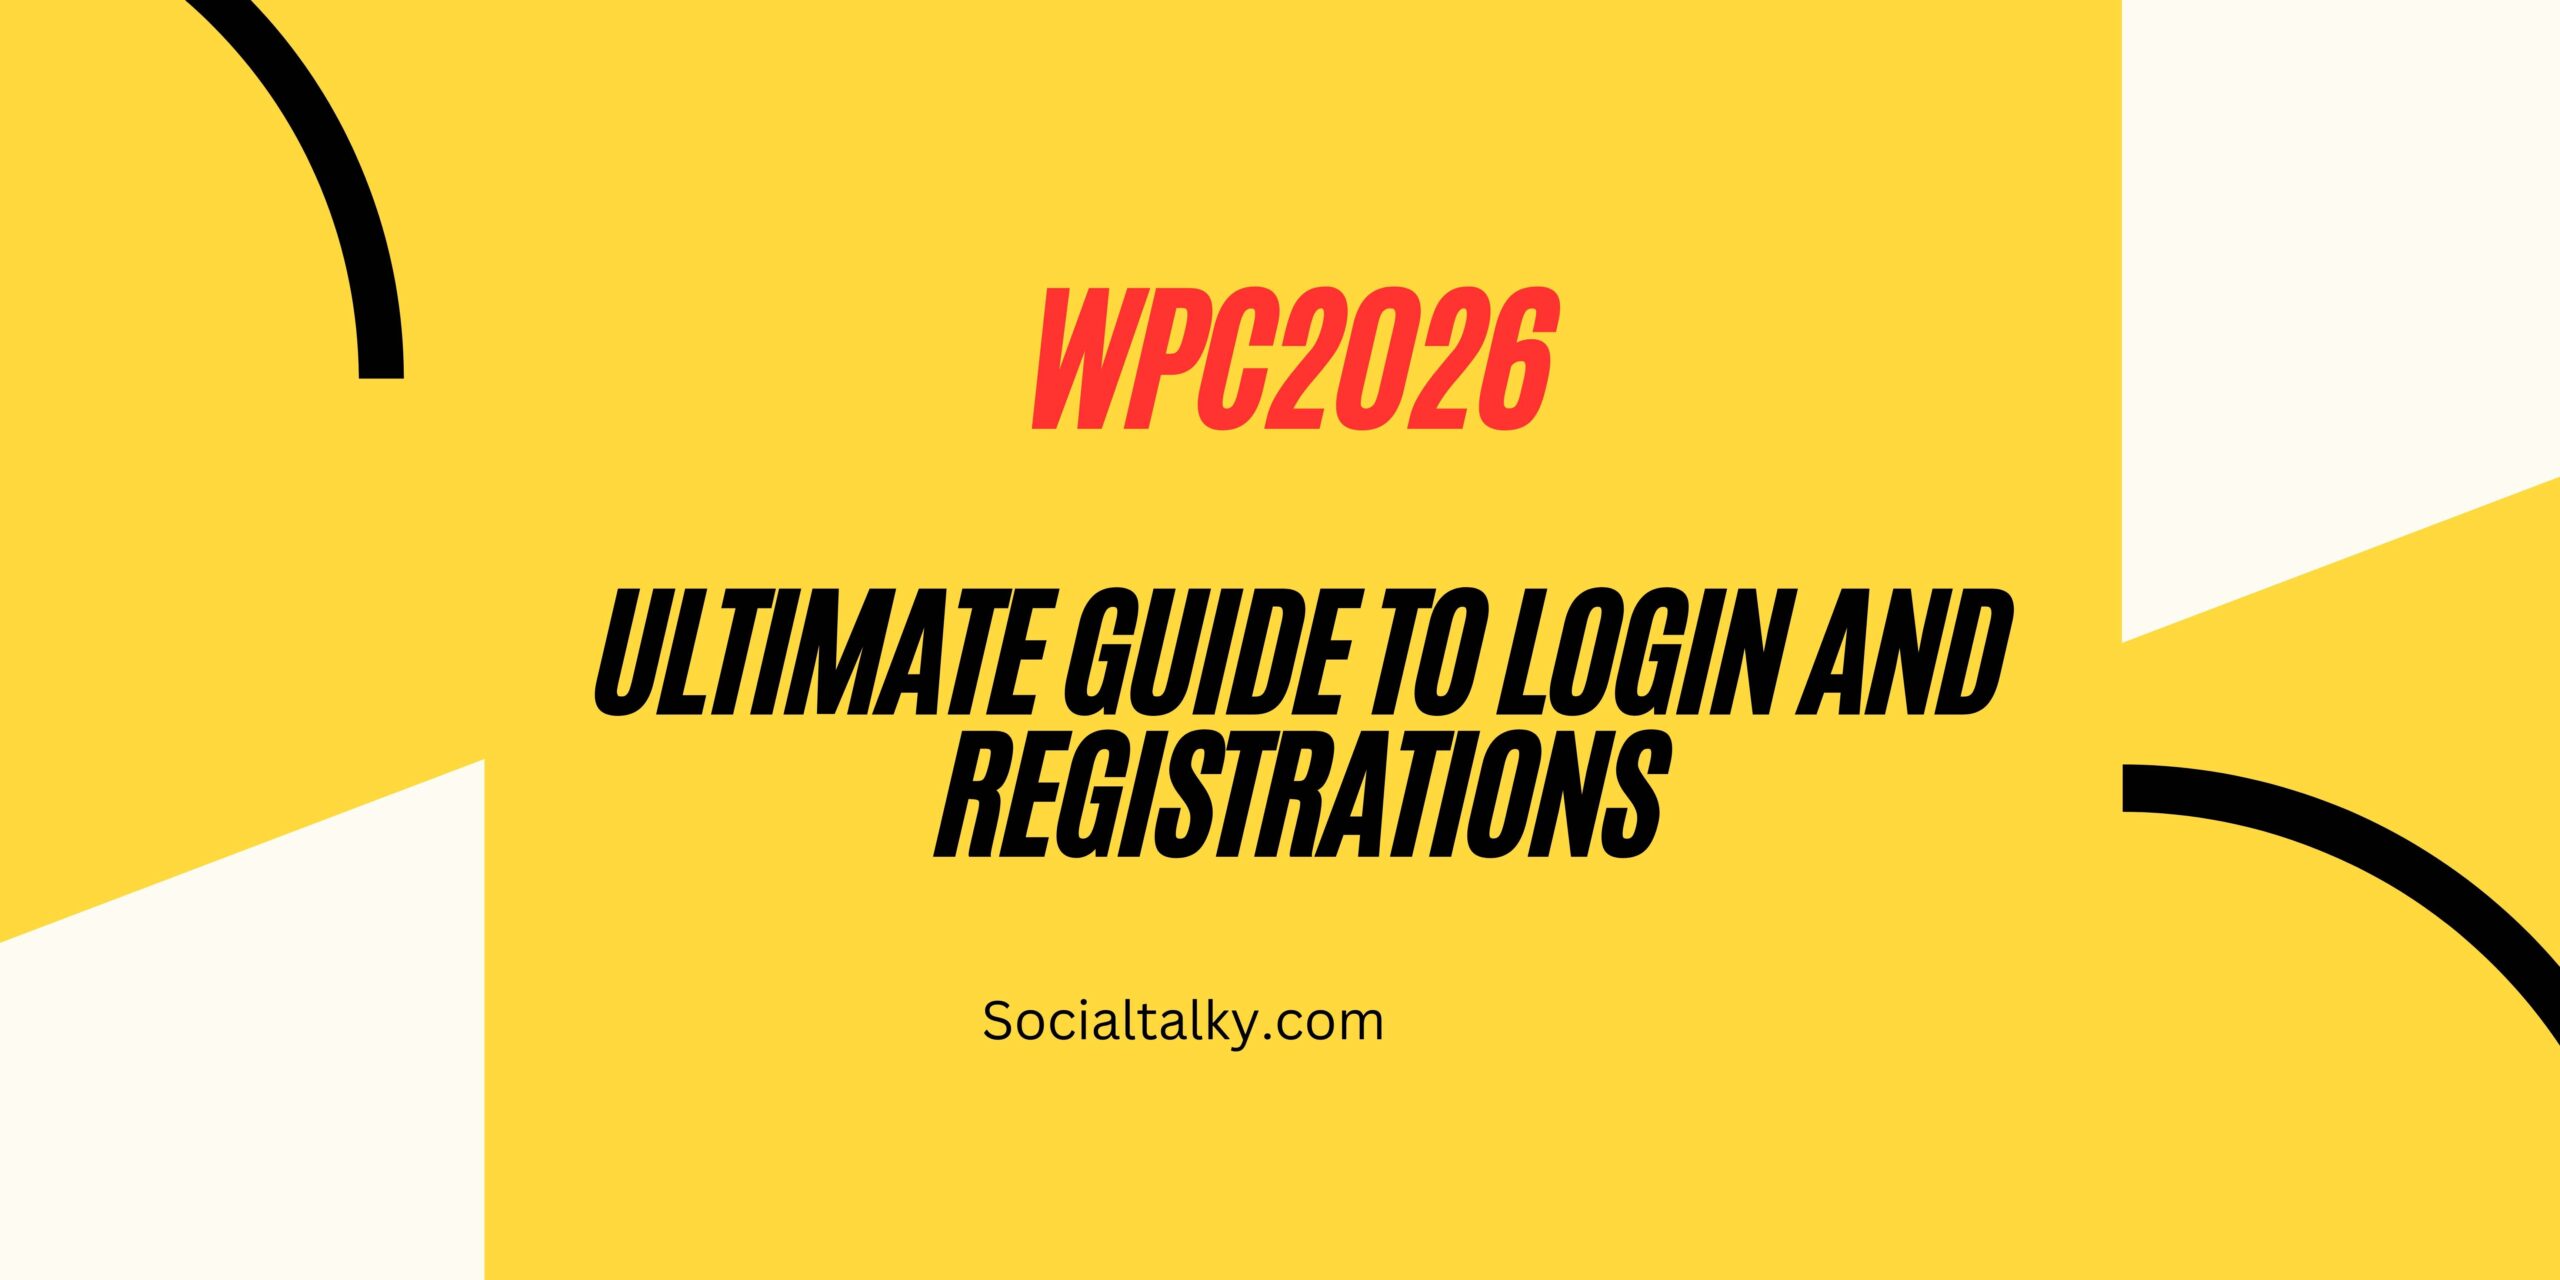 WPC2026 - The Ultimate Guide to Login and Registration